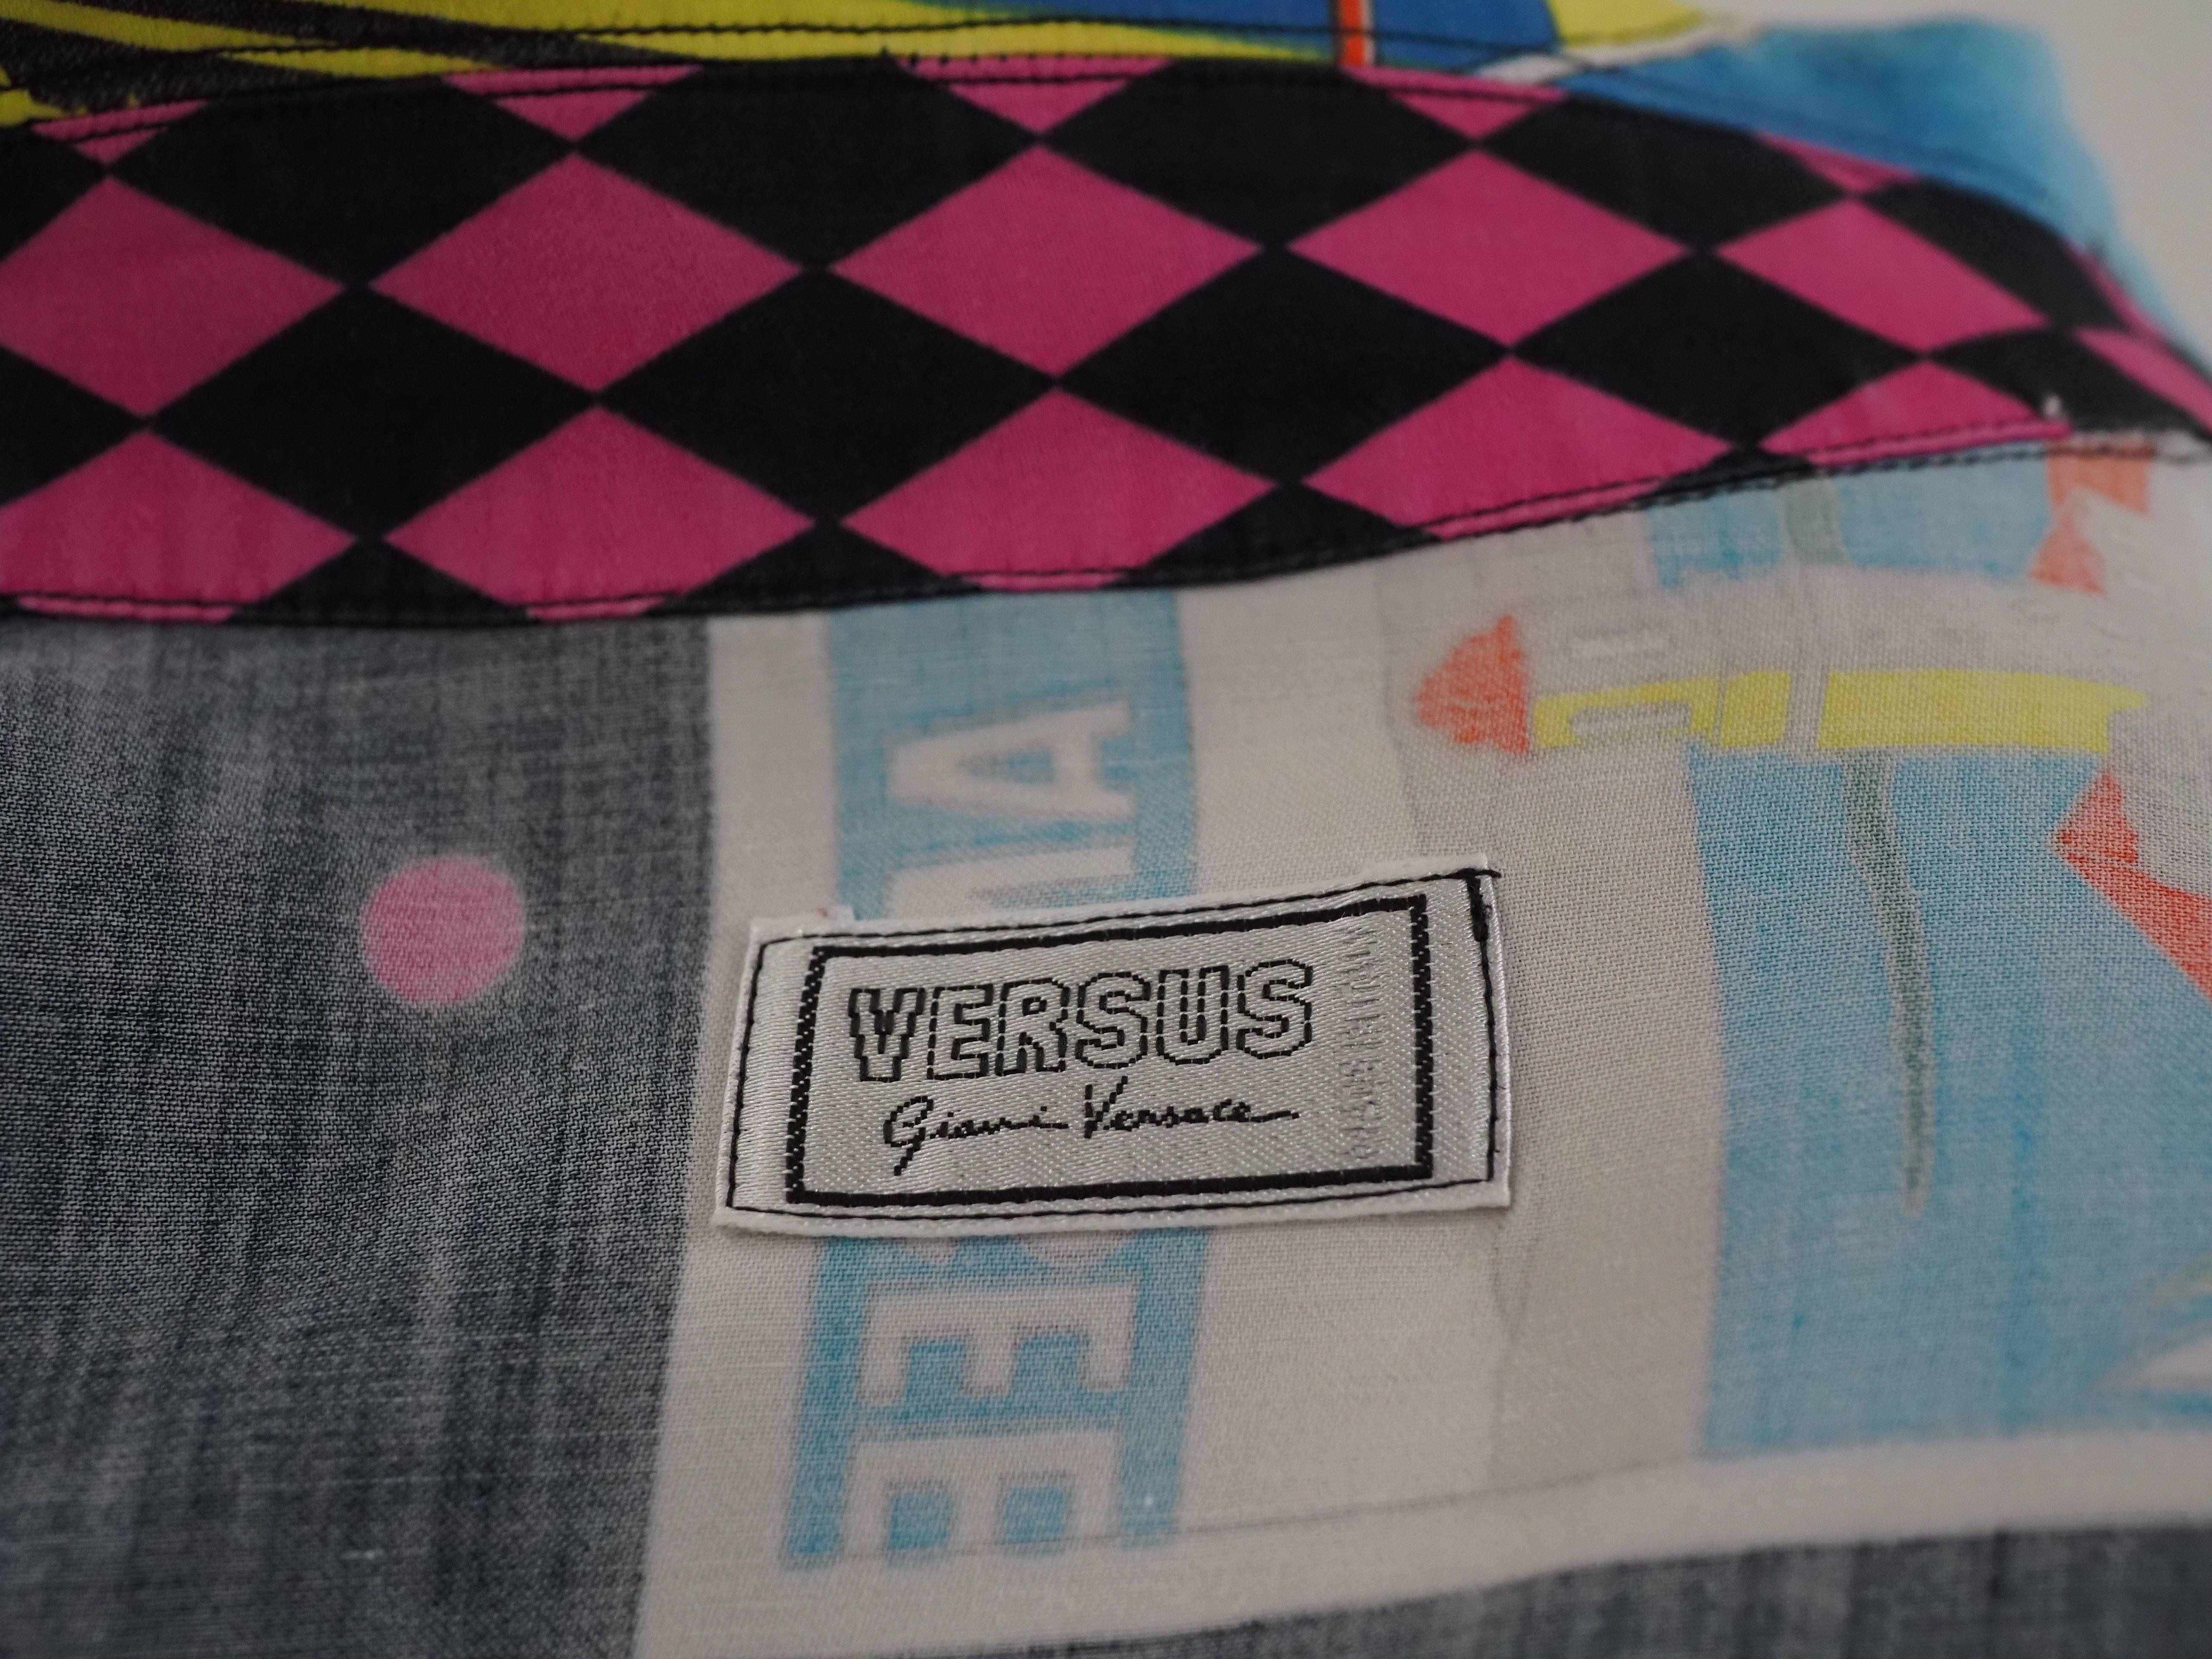 Versus by Gianni Versace multicoloured Cities and Hotels shirt 14